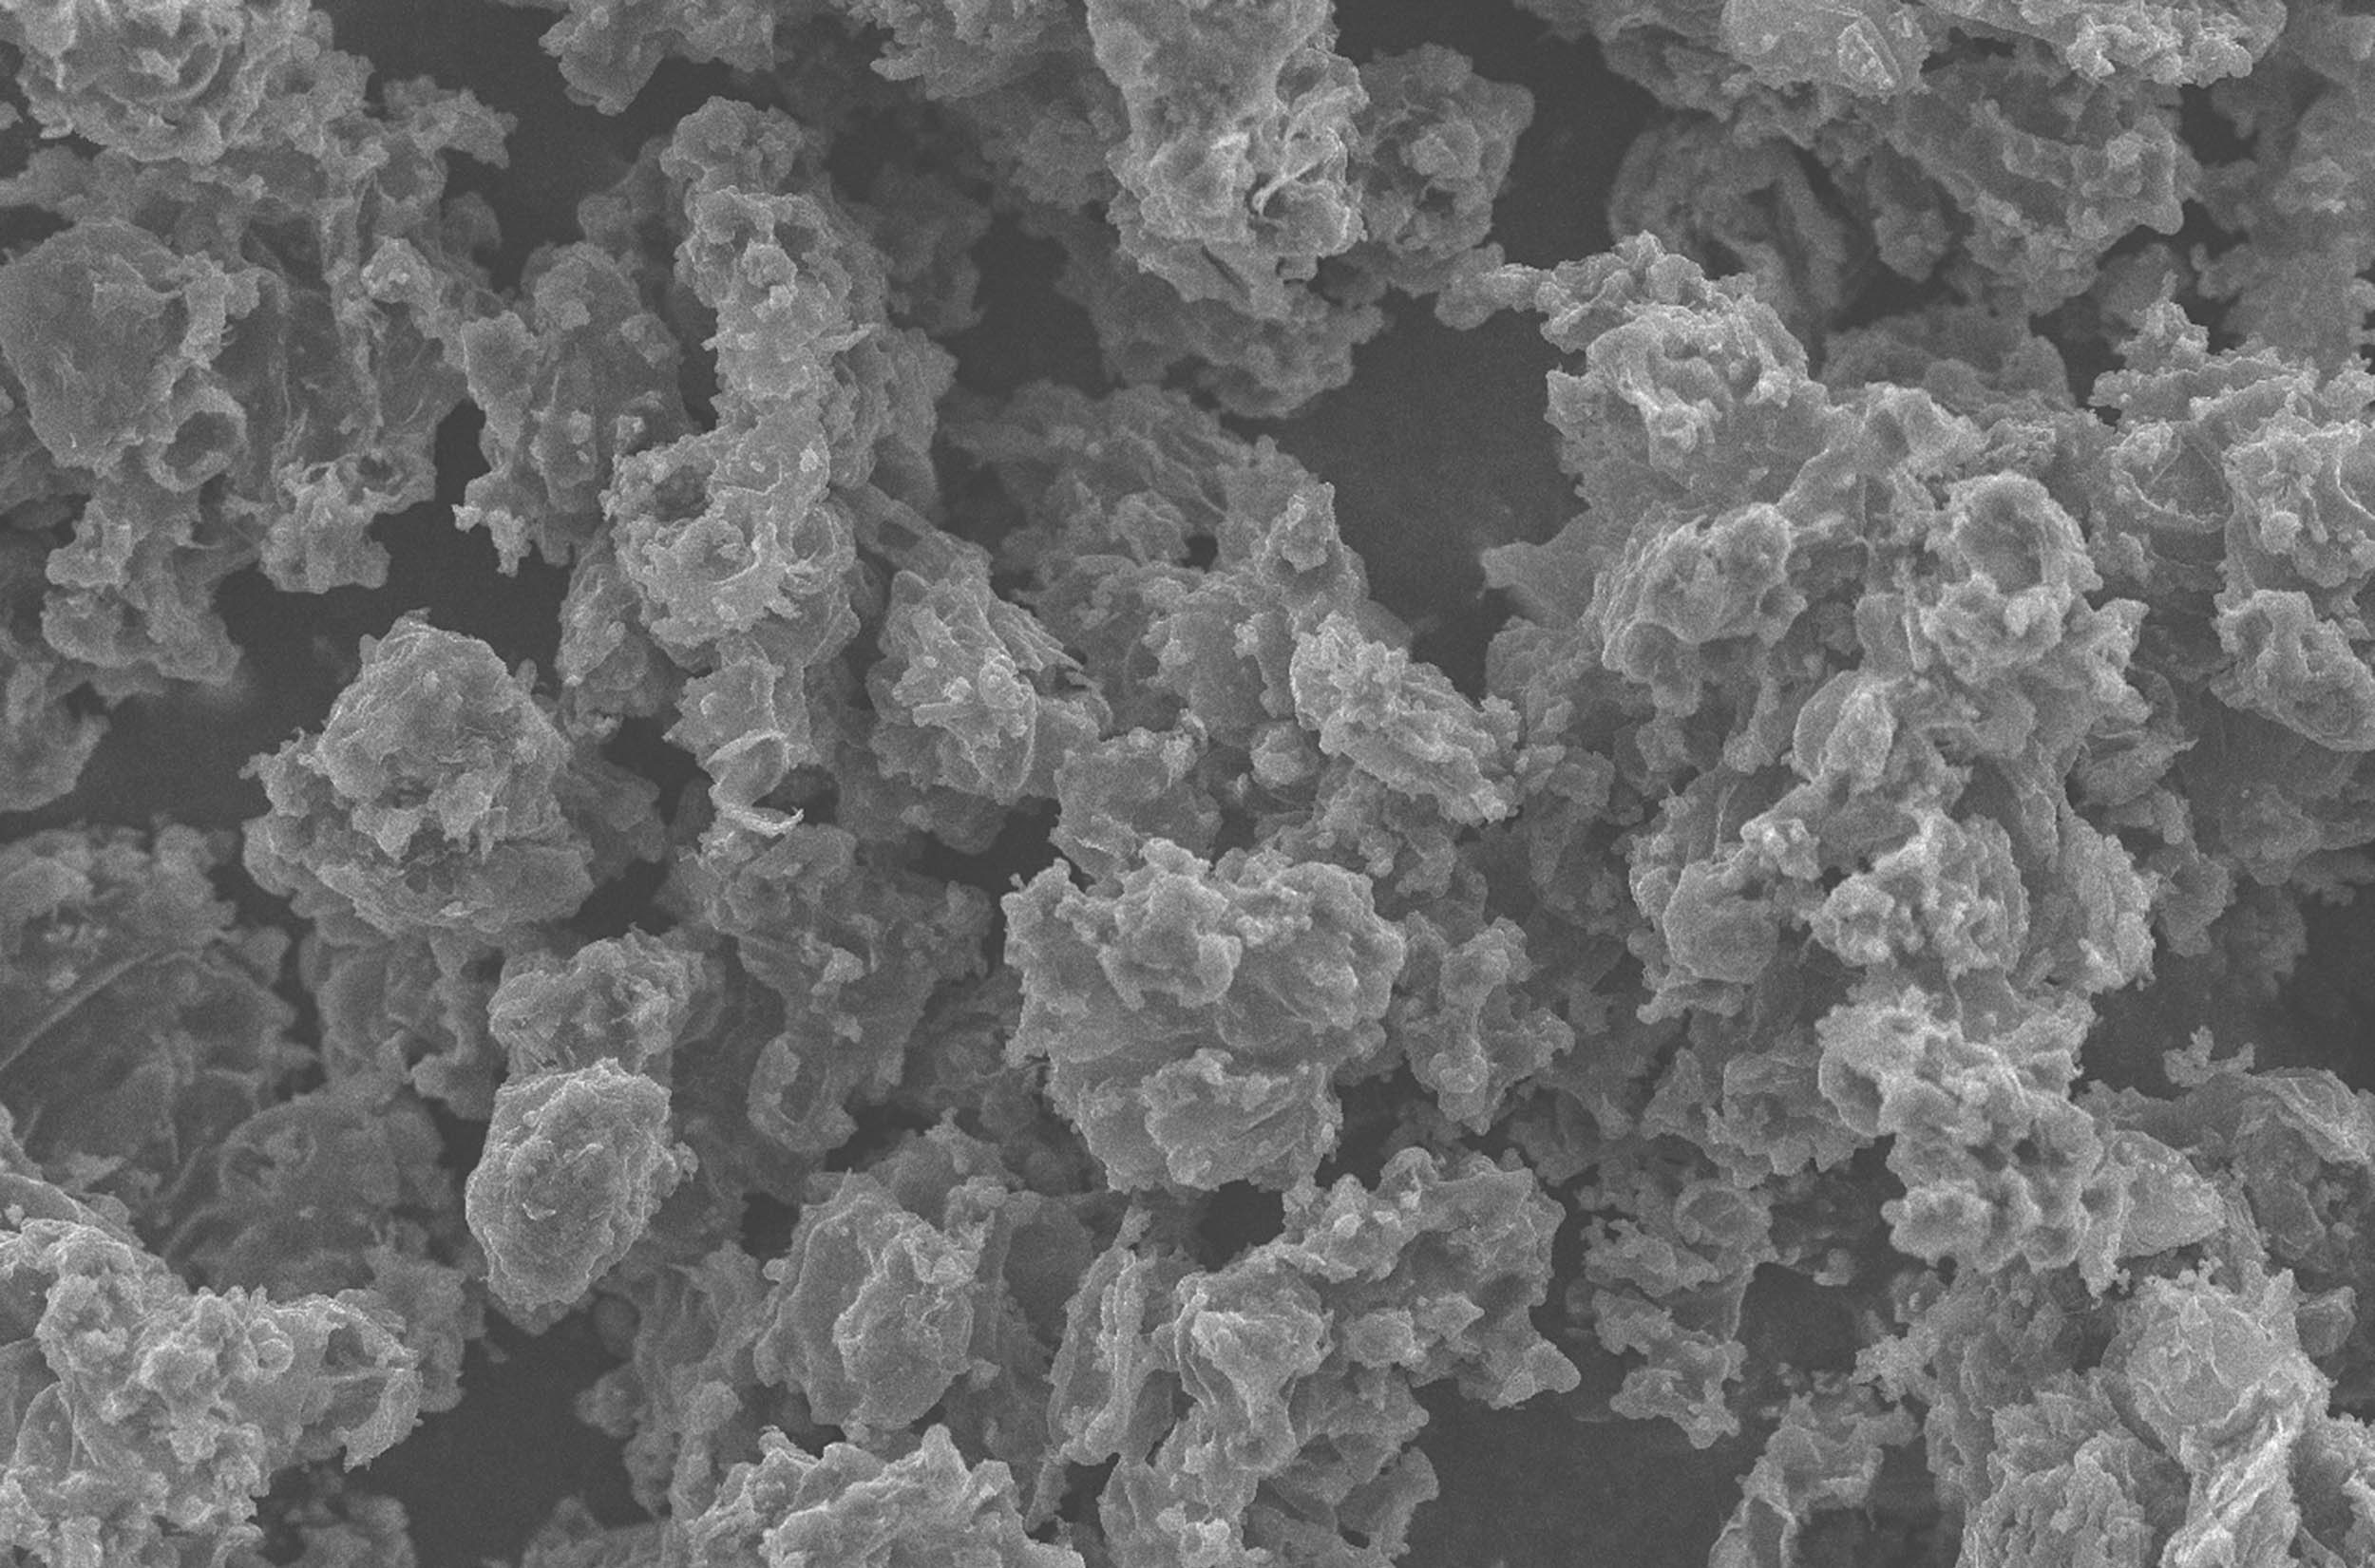 Oxidized polythiophene for additive manufacturing with nanoparticles